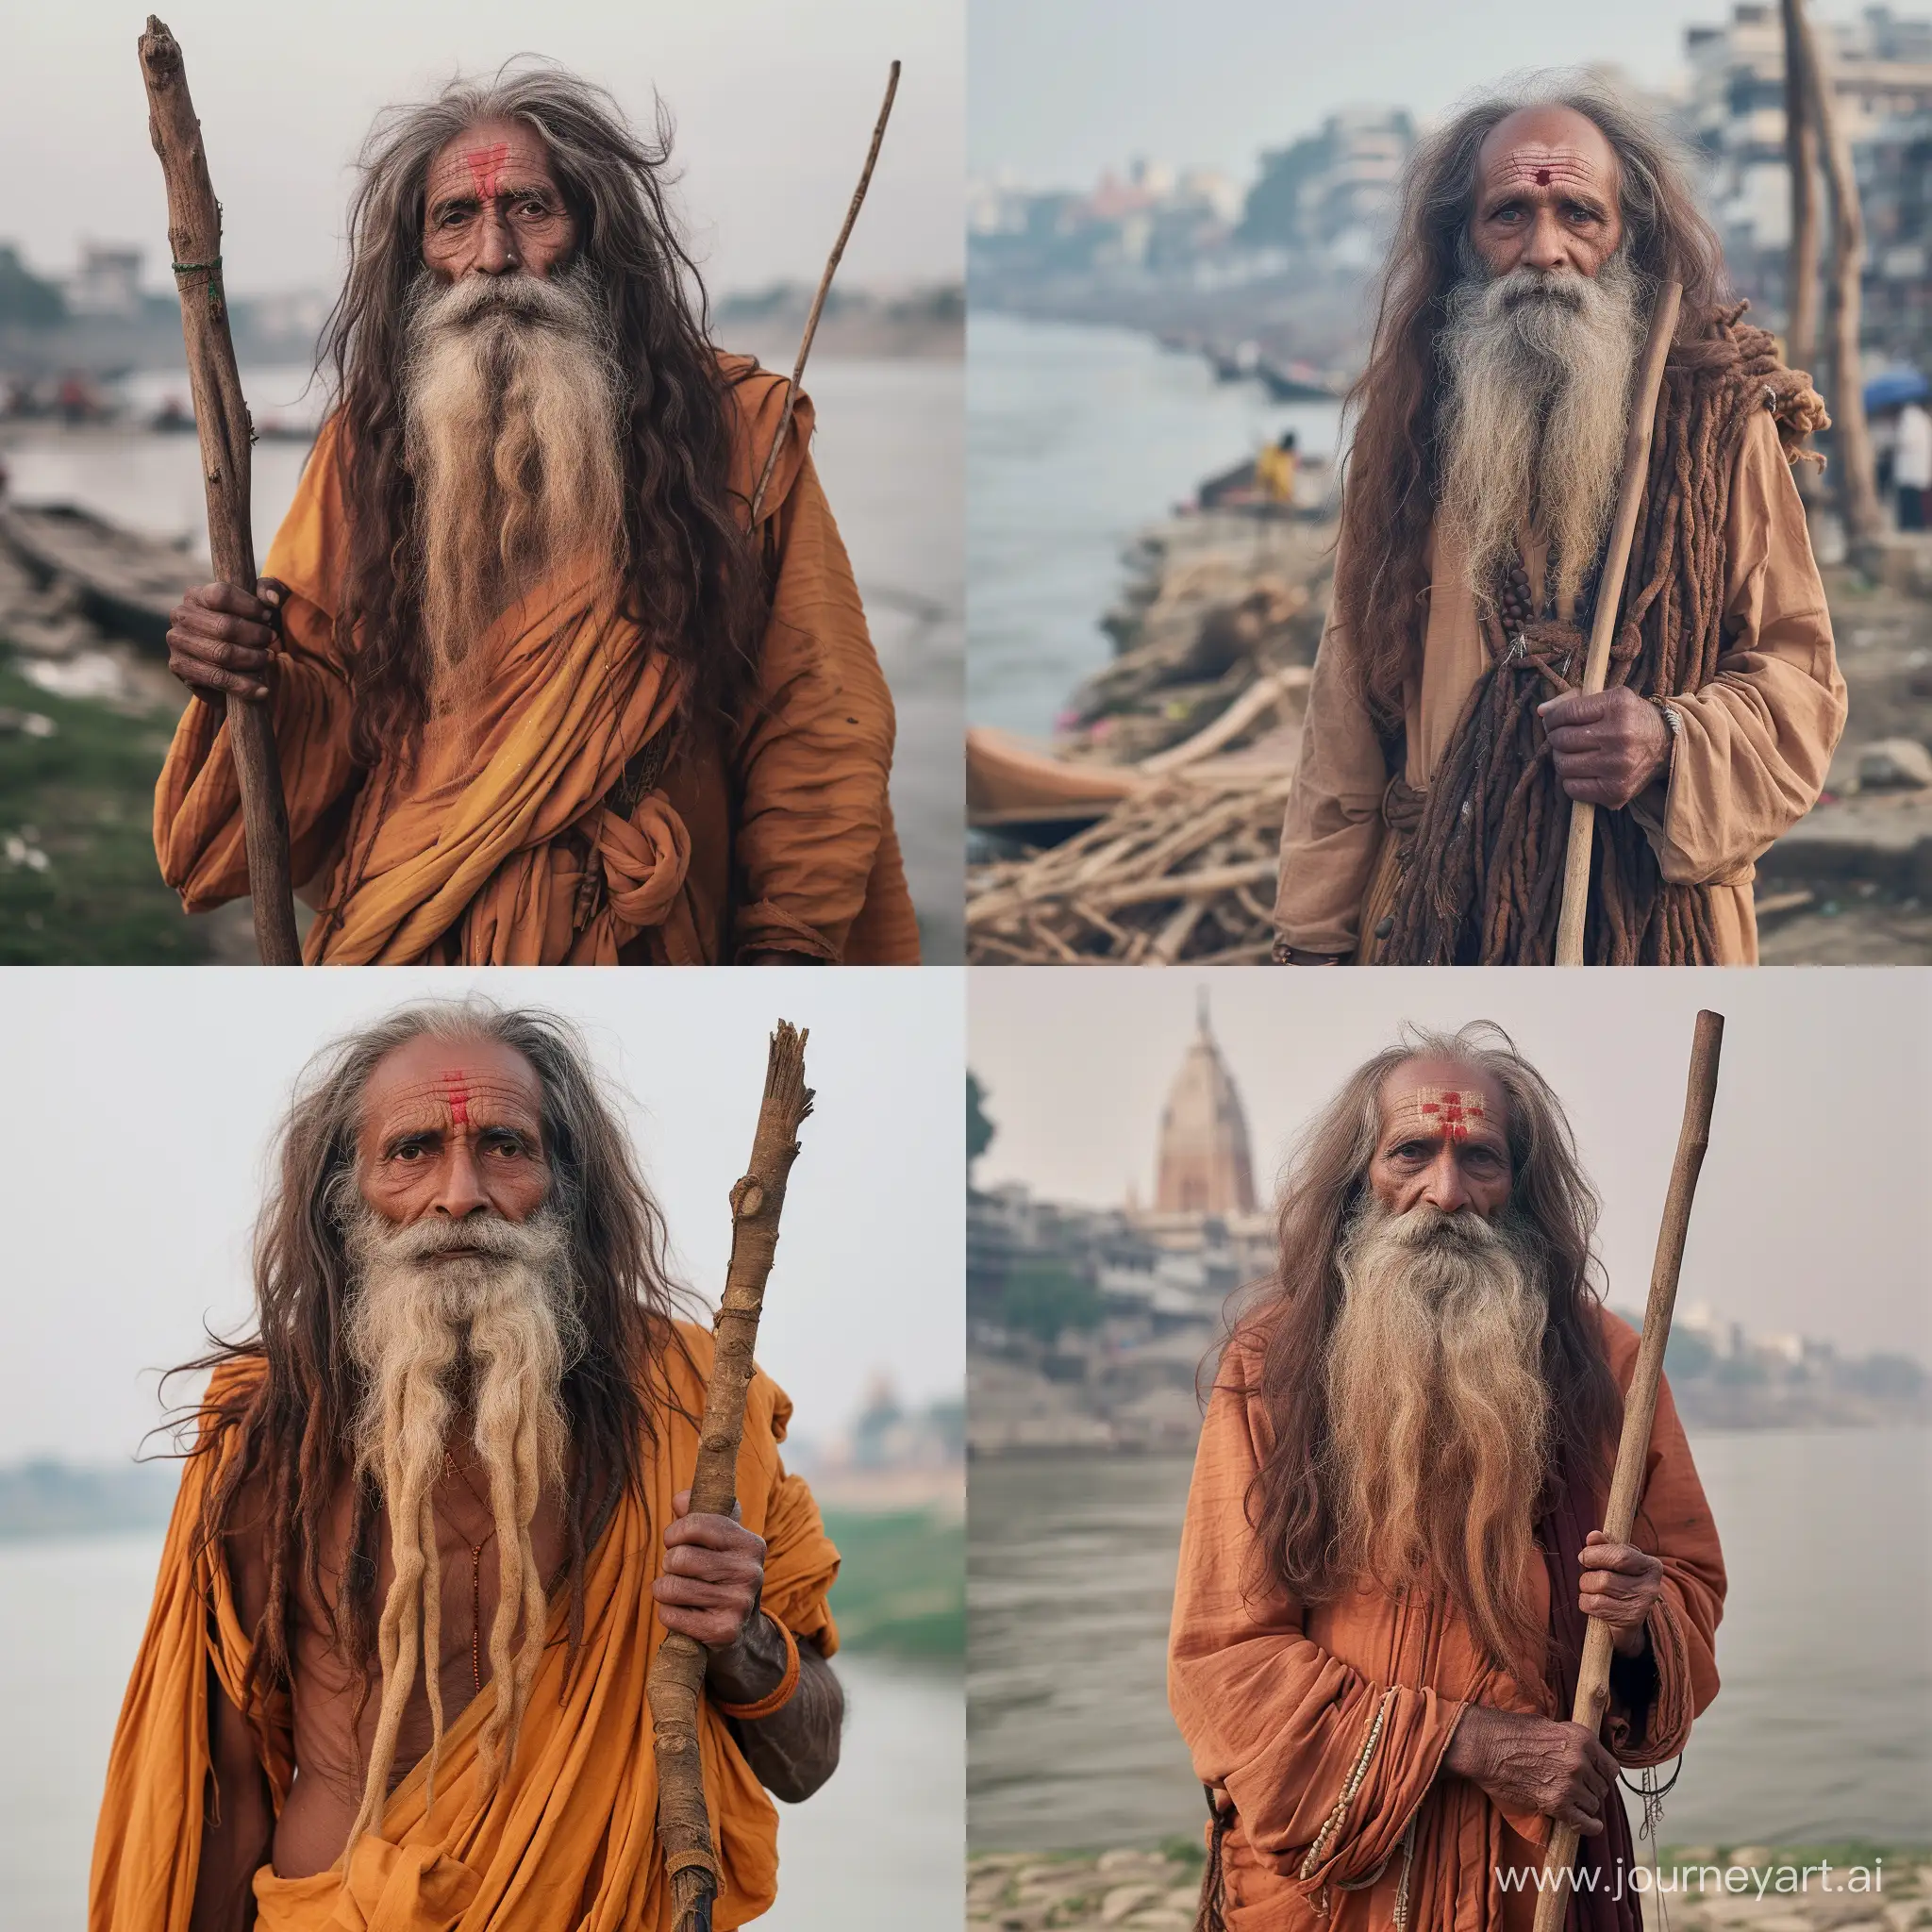 holymen 80 years old with stick in his hands and very long brown hair on right side standing before ganges india  soft contrast  total body  low angle 35mm fuji xt4 fotorealistisch